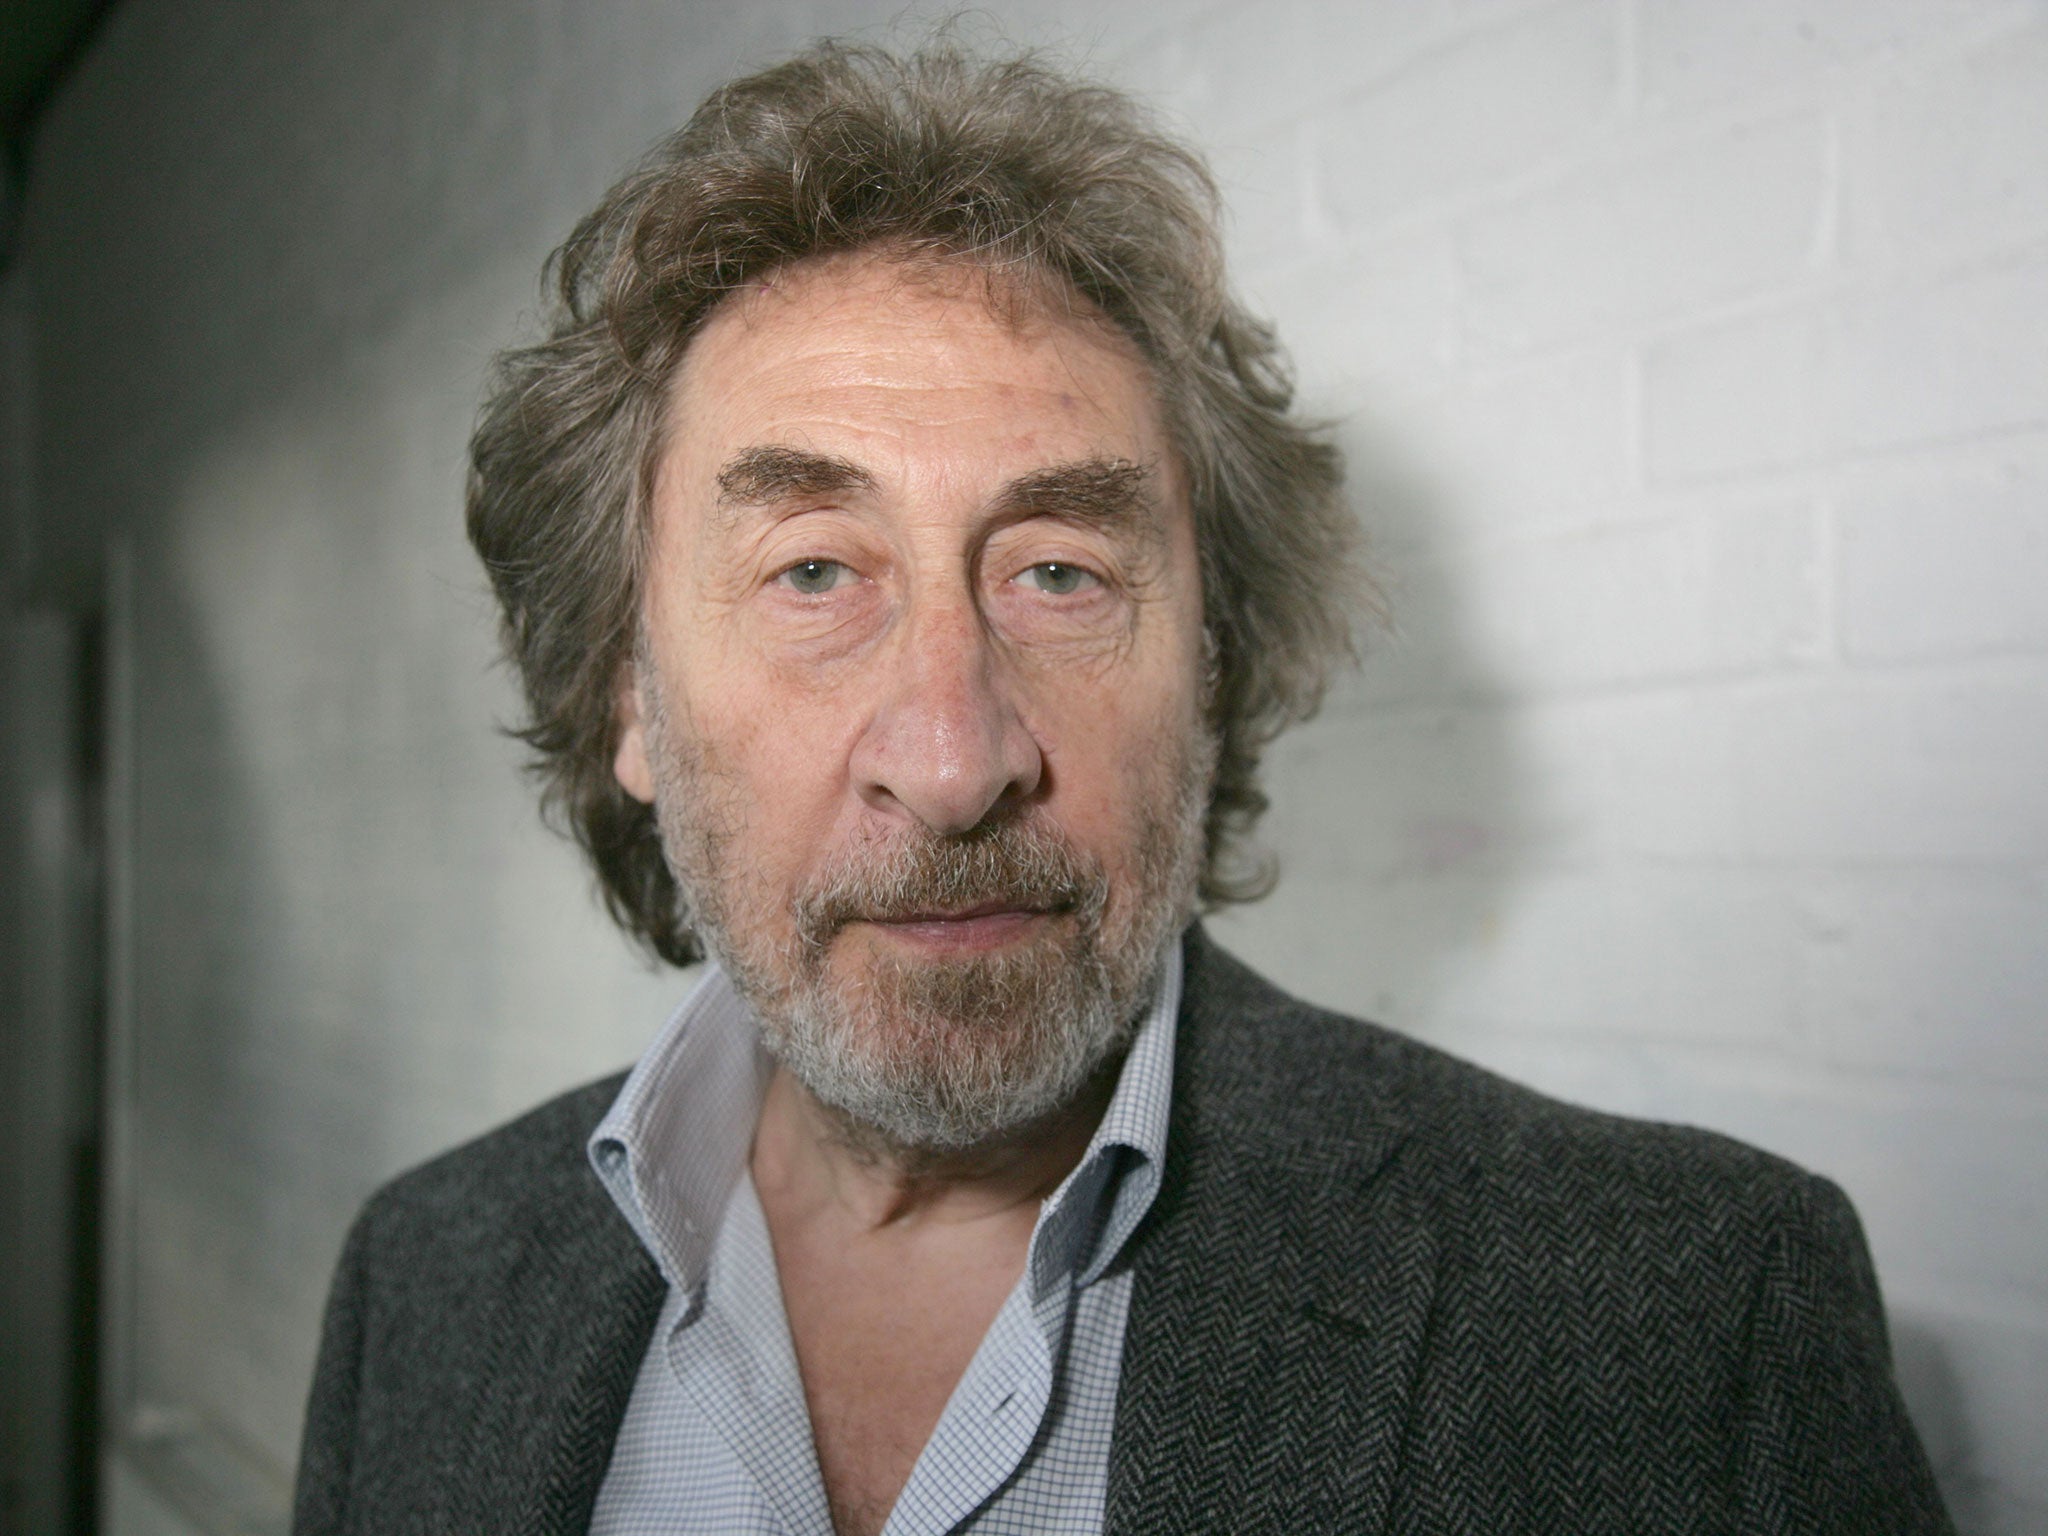 Howard Jacobson has been shortlisted for the Man Booker Prize for the second time